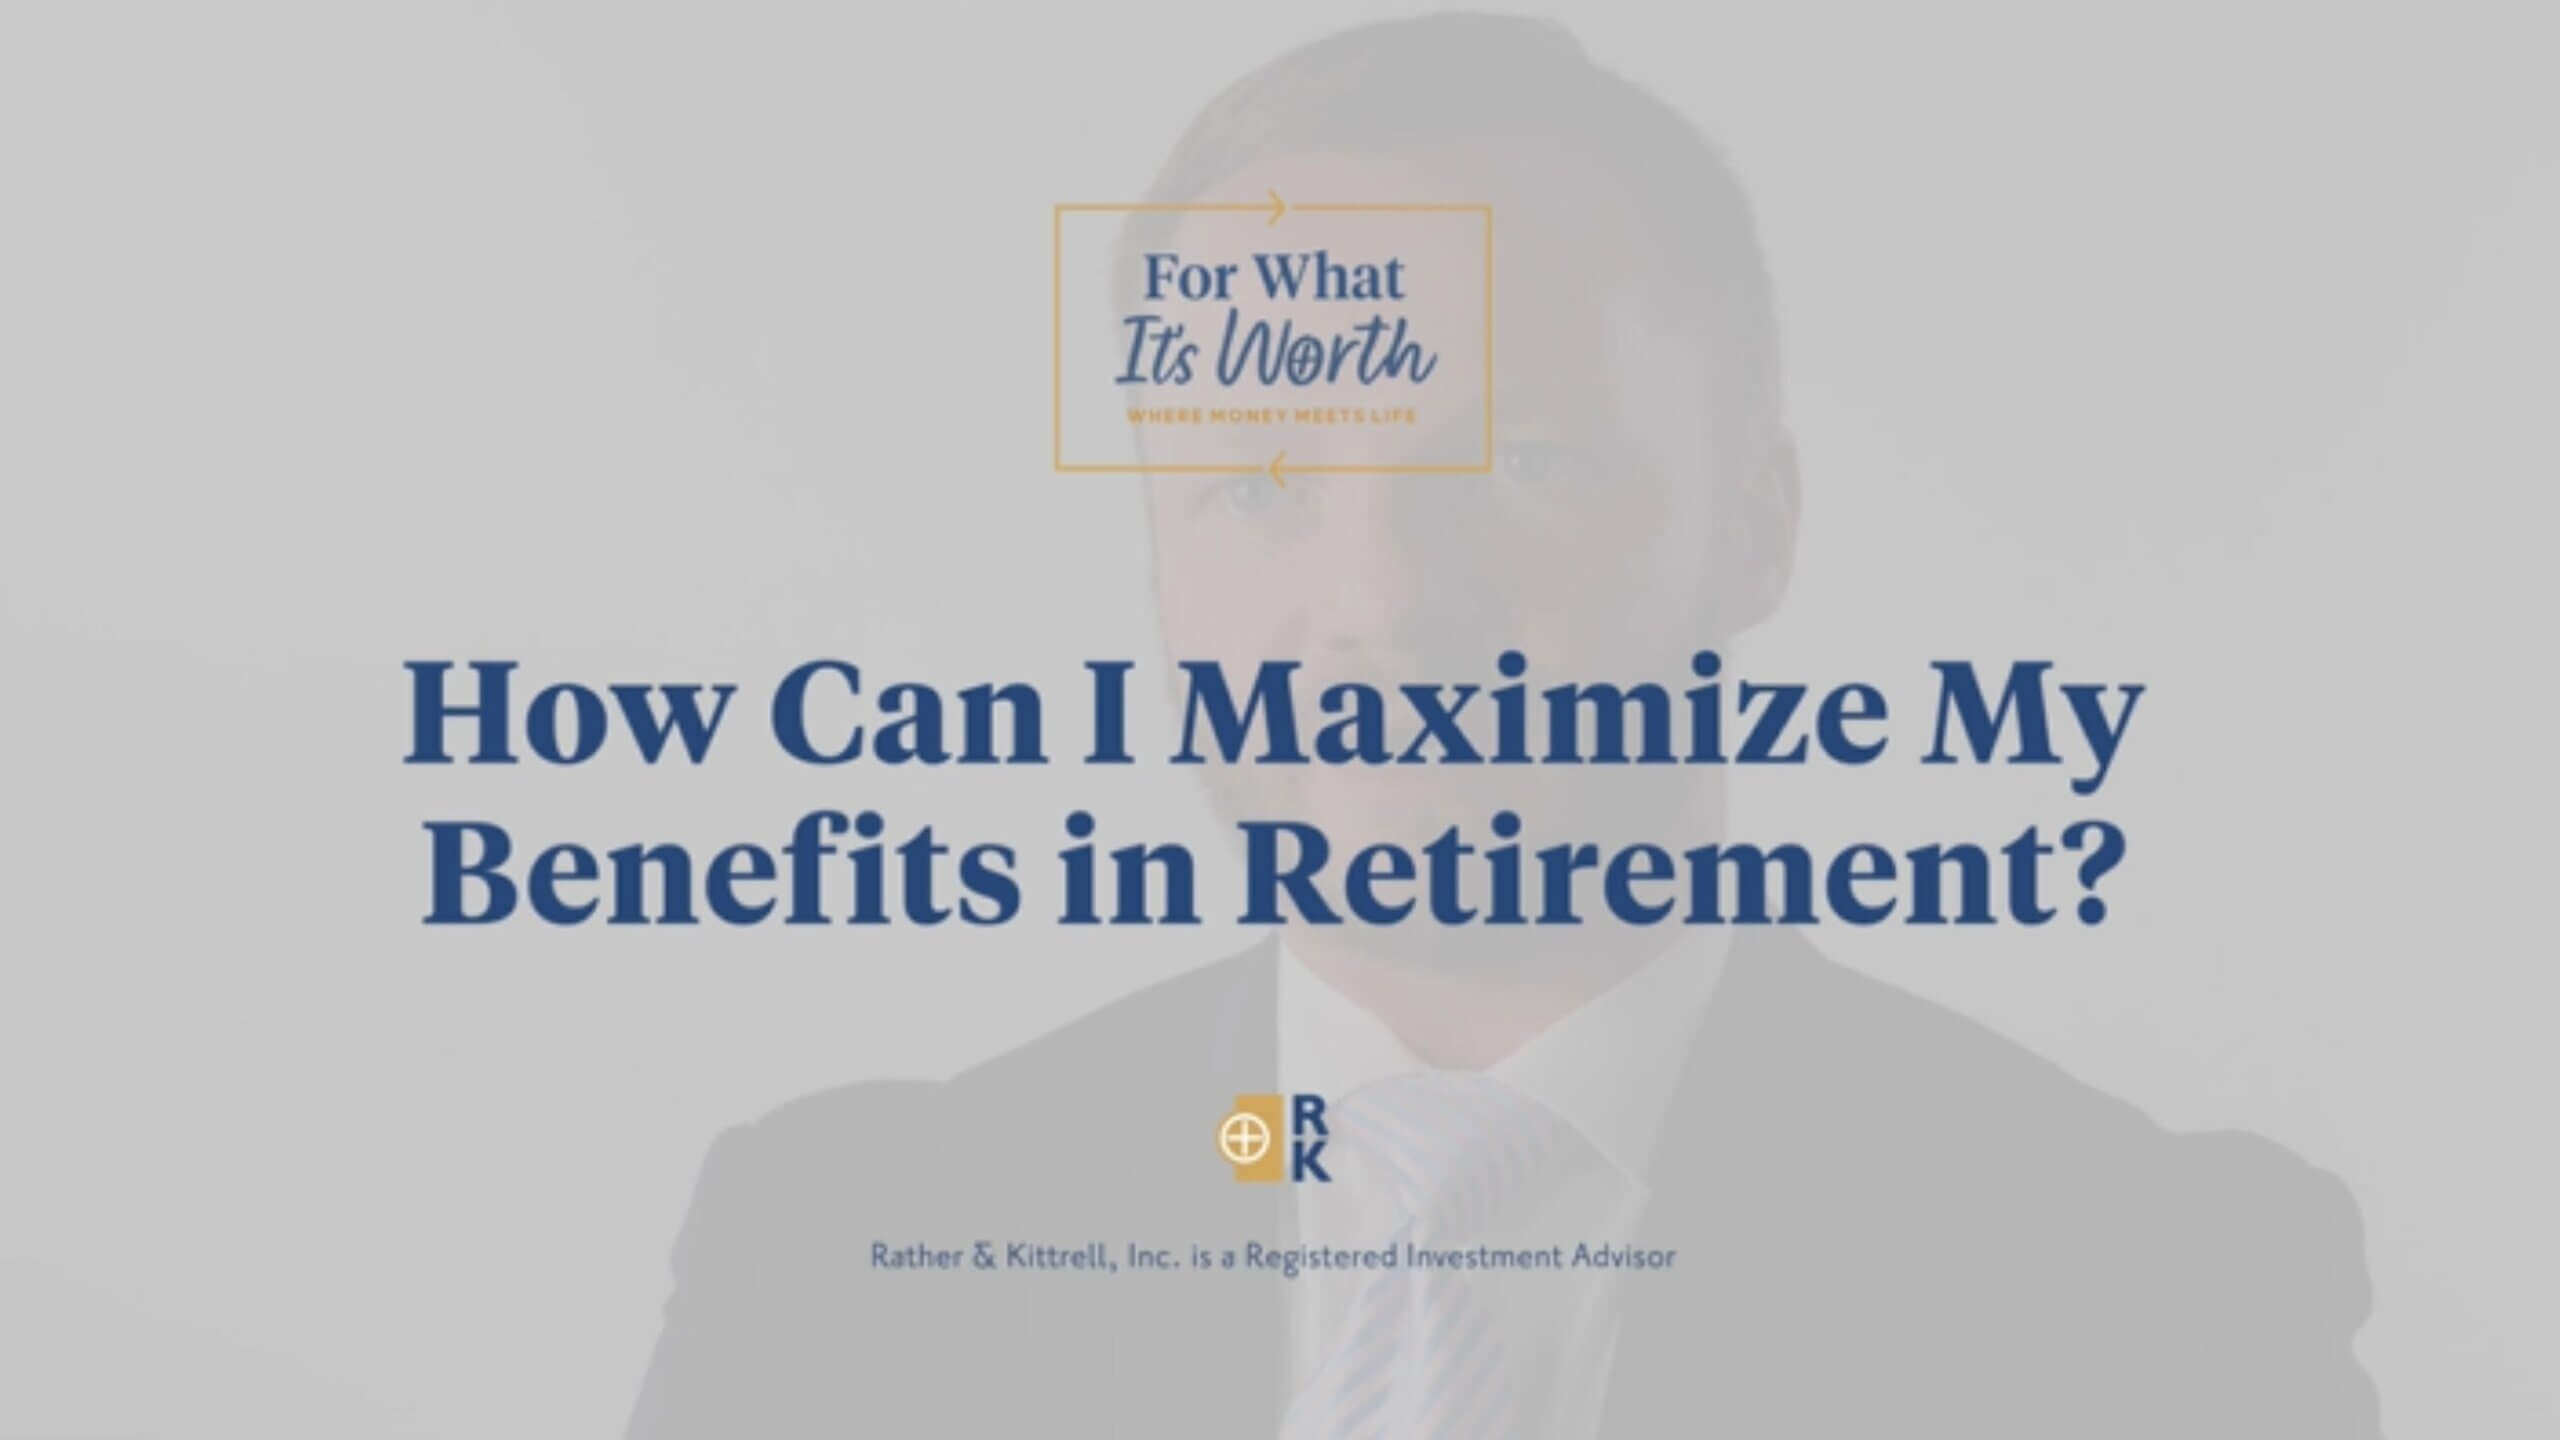 How Can I Maximize My Benefits in Retirement?